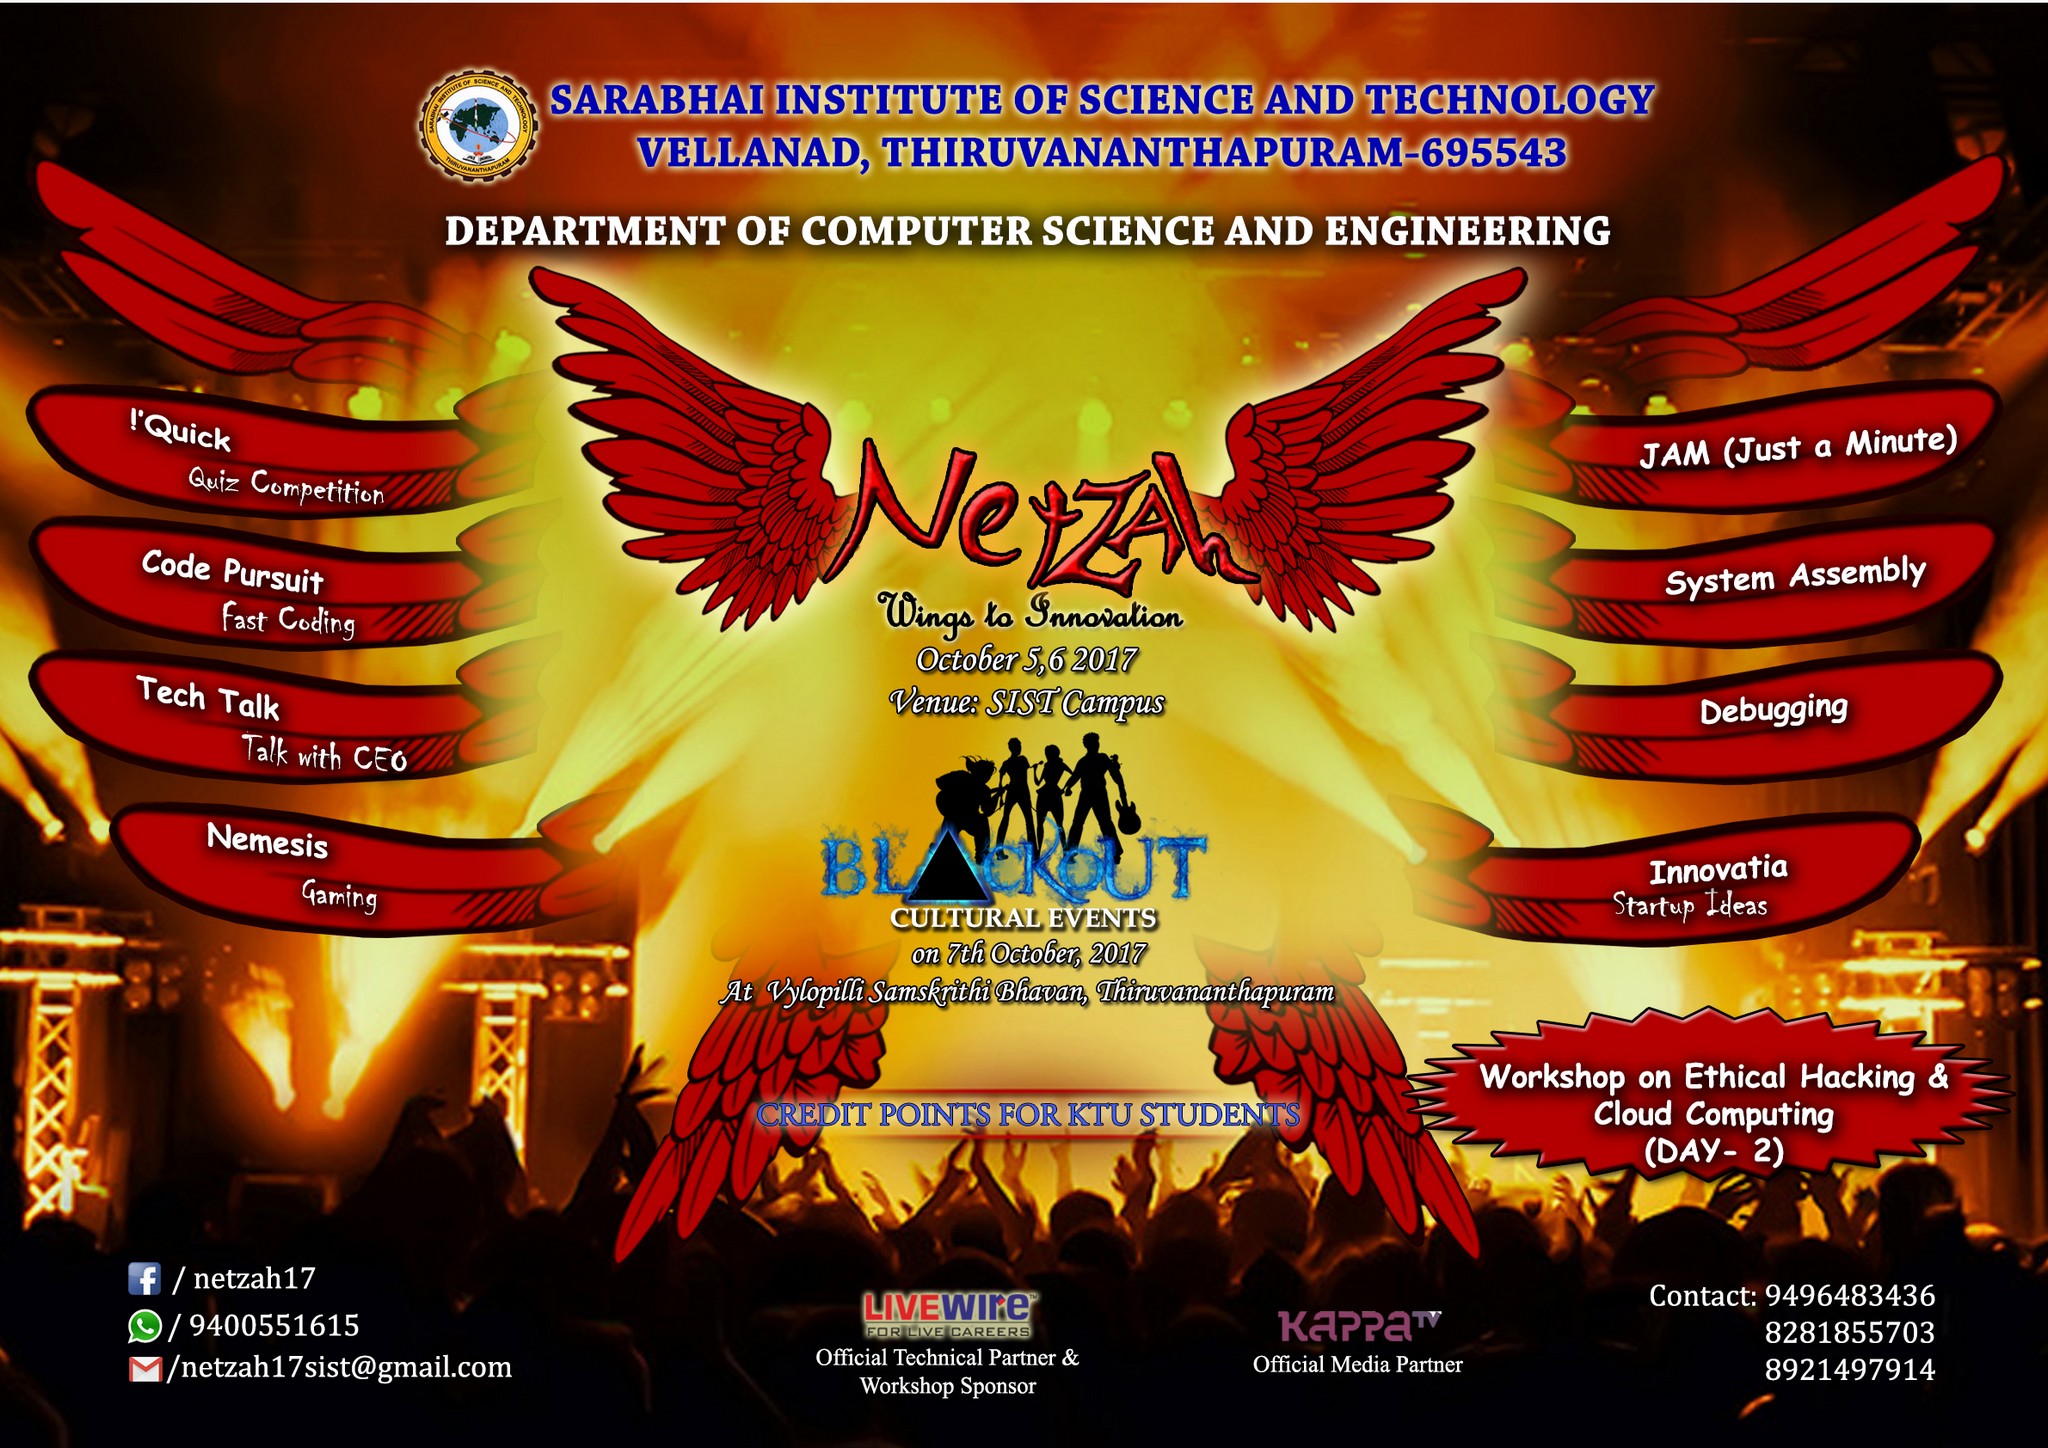 Netzah - Wings to Innovation - Cultural Events - SIST